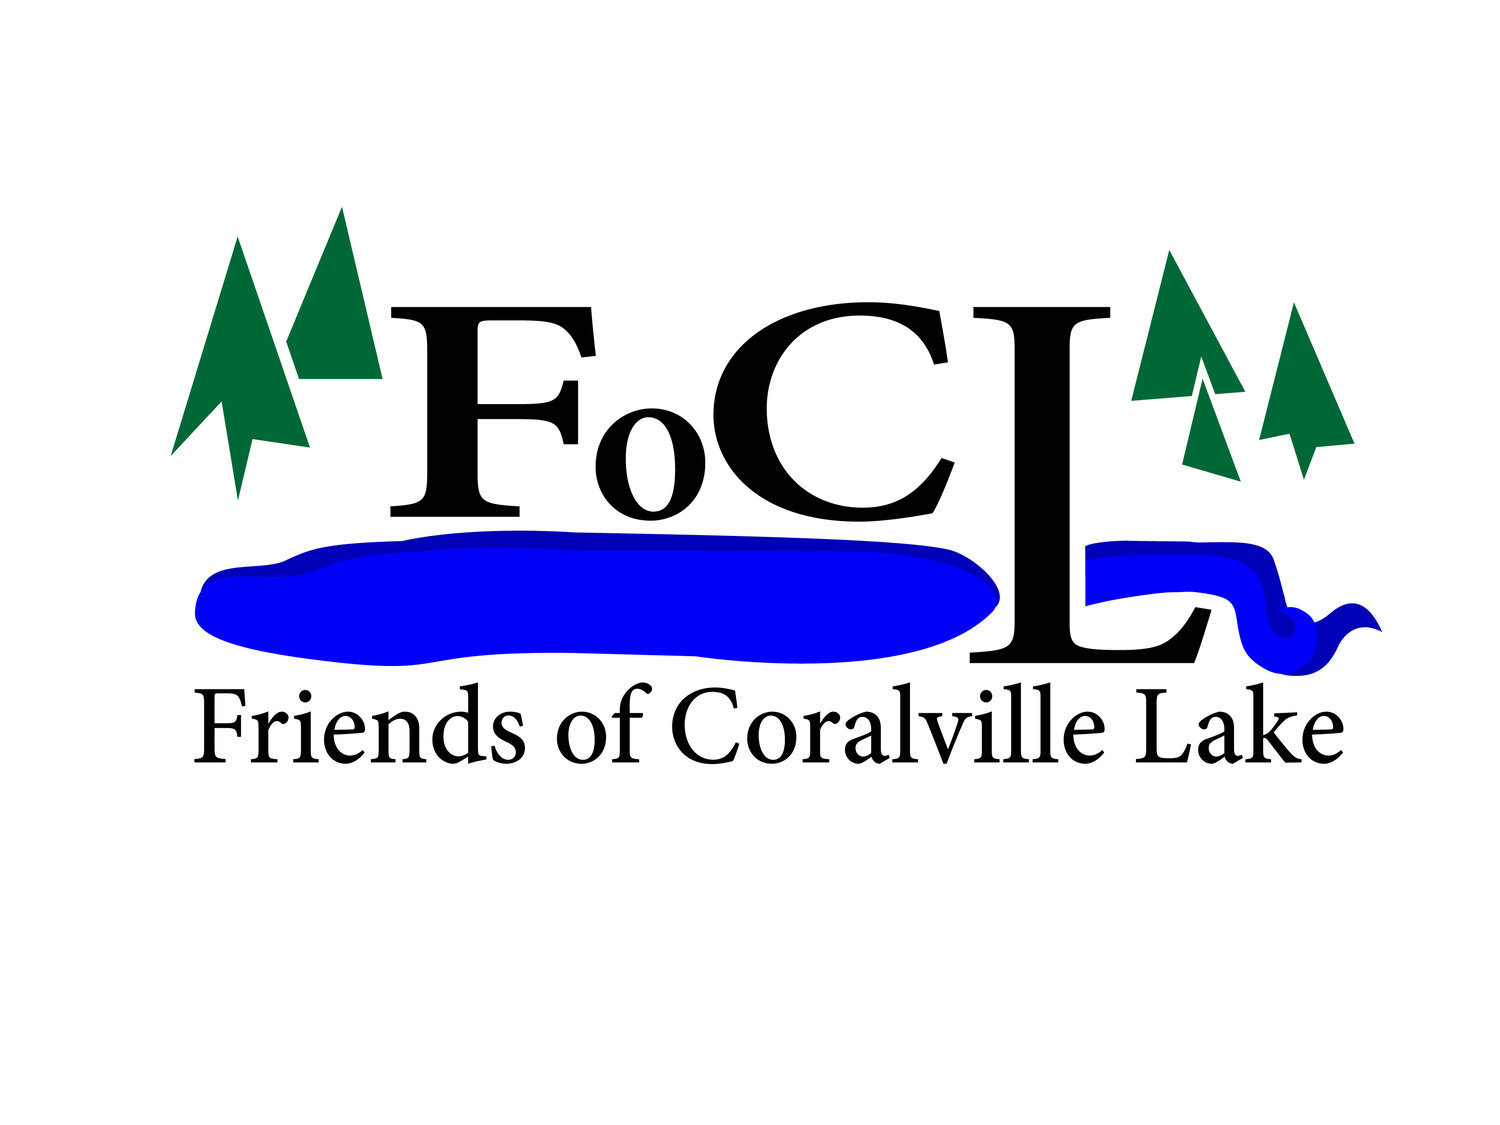 Friends of Coralville Lake